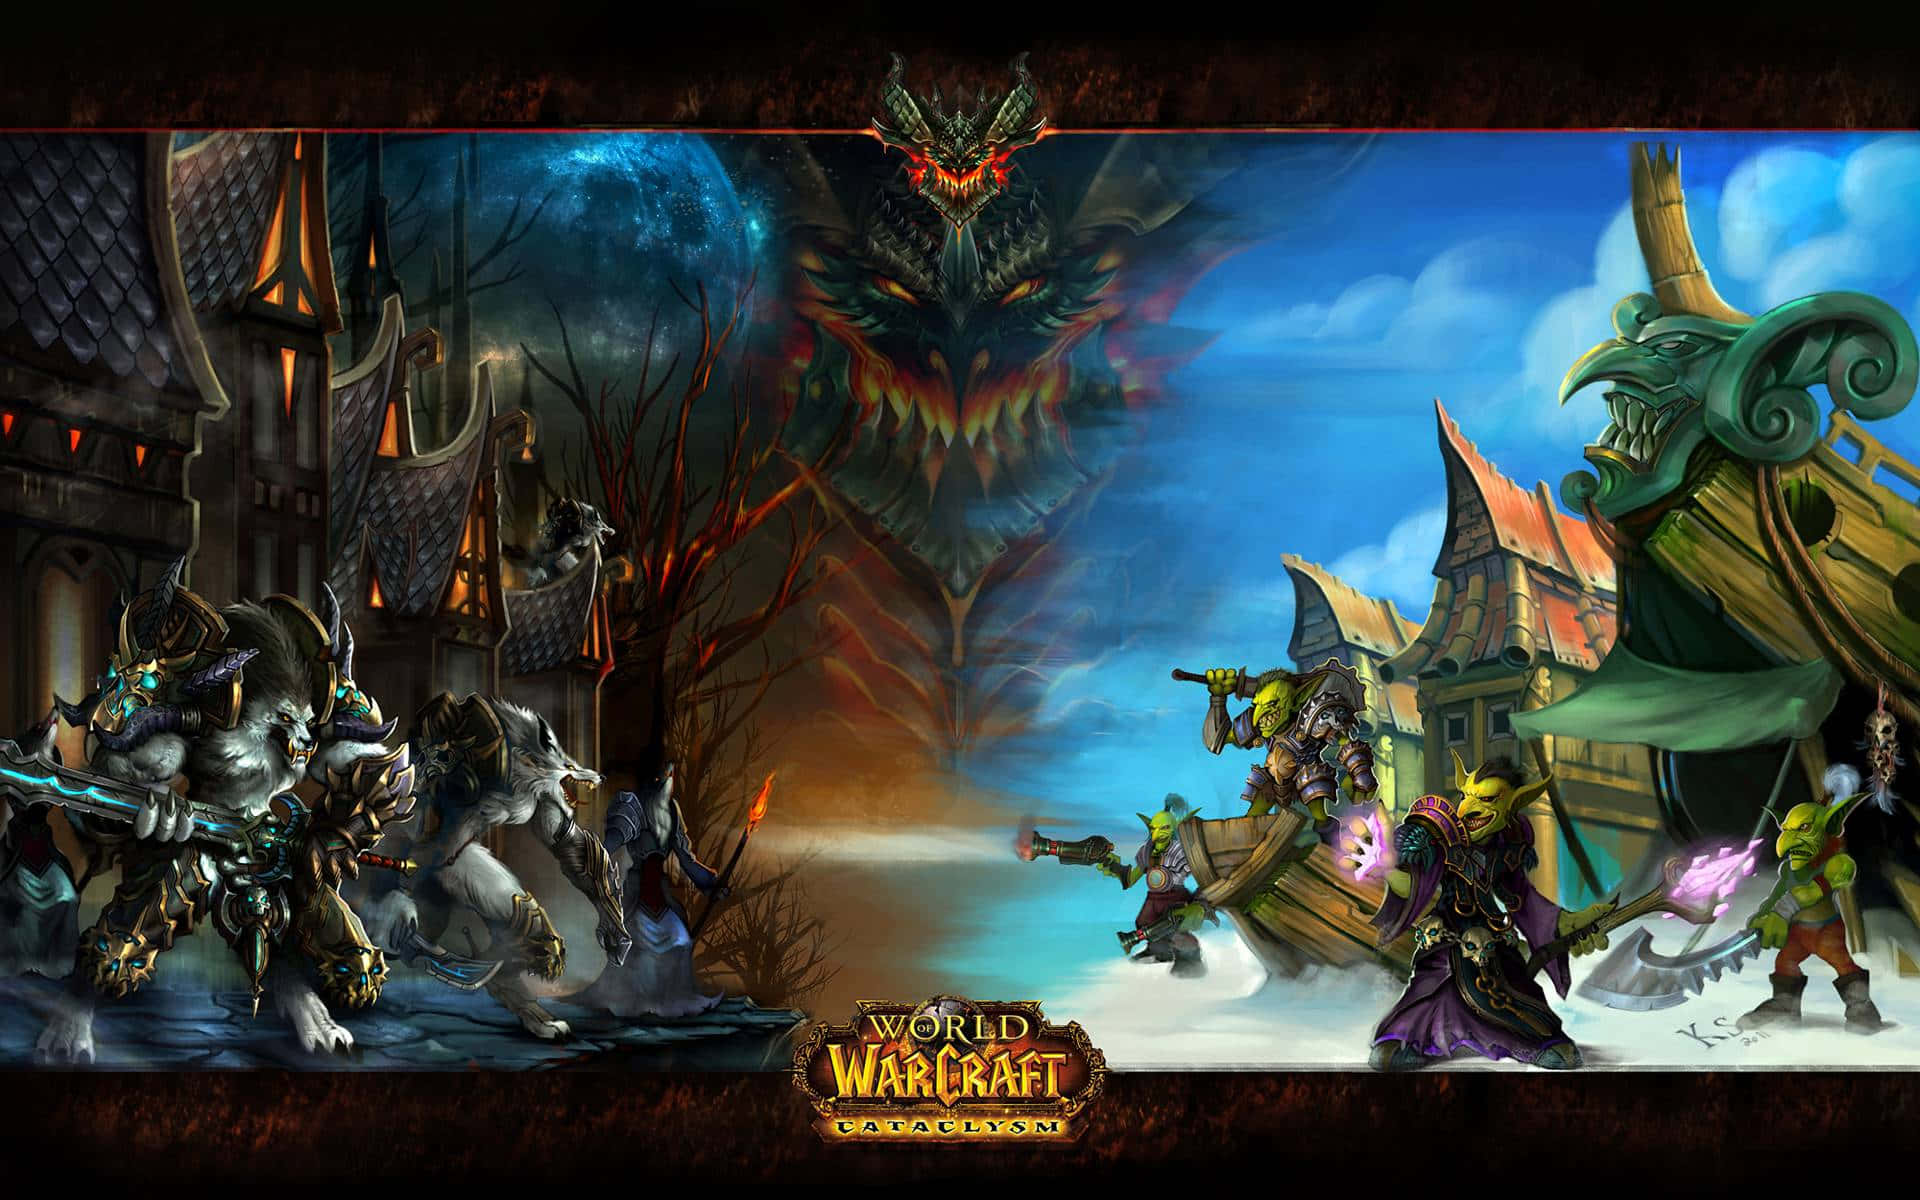 A majestic battle between mystical creatures in the stunning World of Warcraft universe